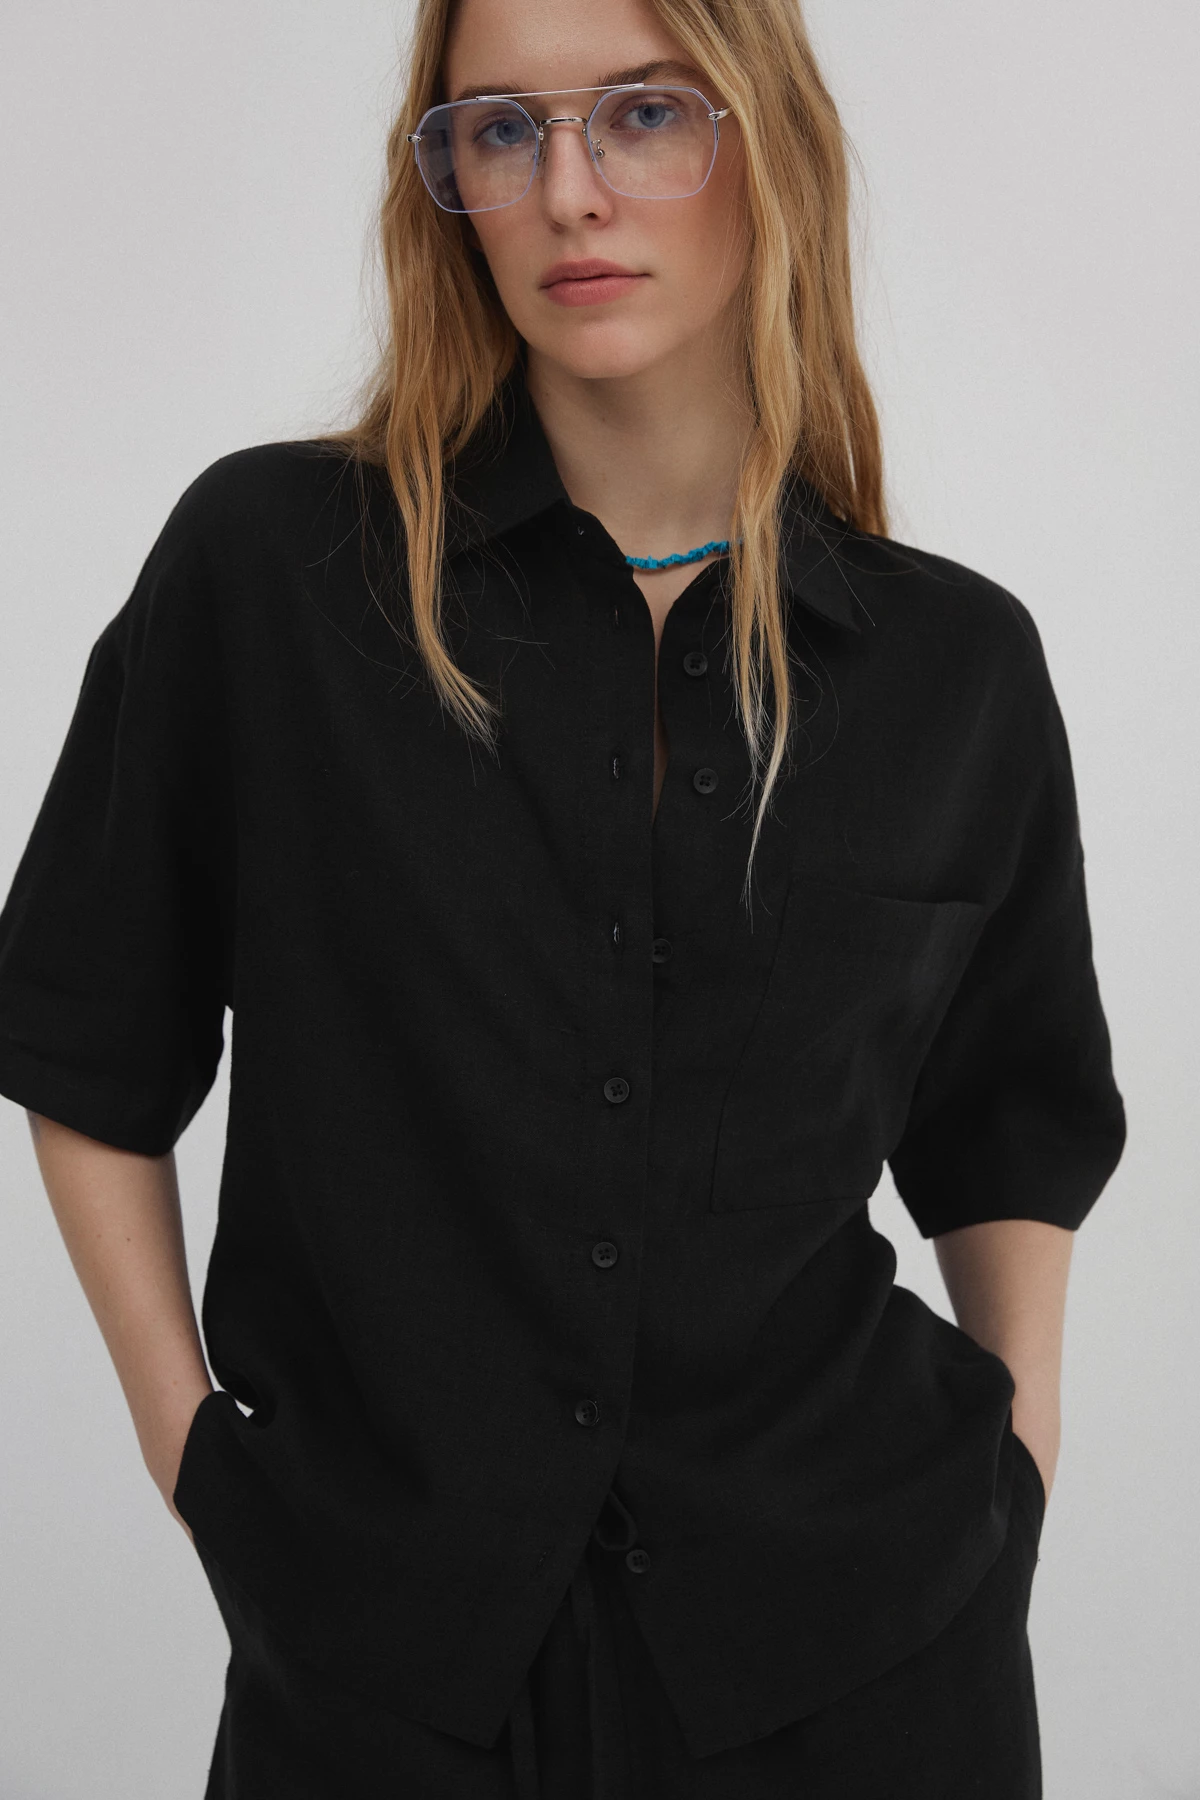 Black shirt with short sleeves made of linen, photo 2